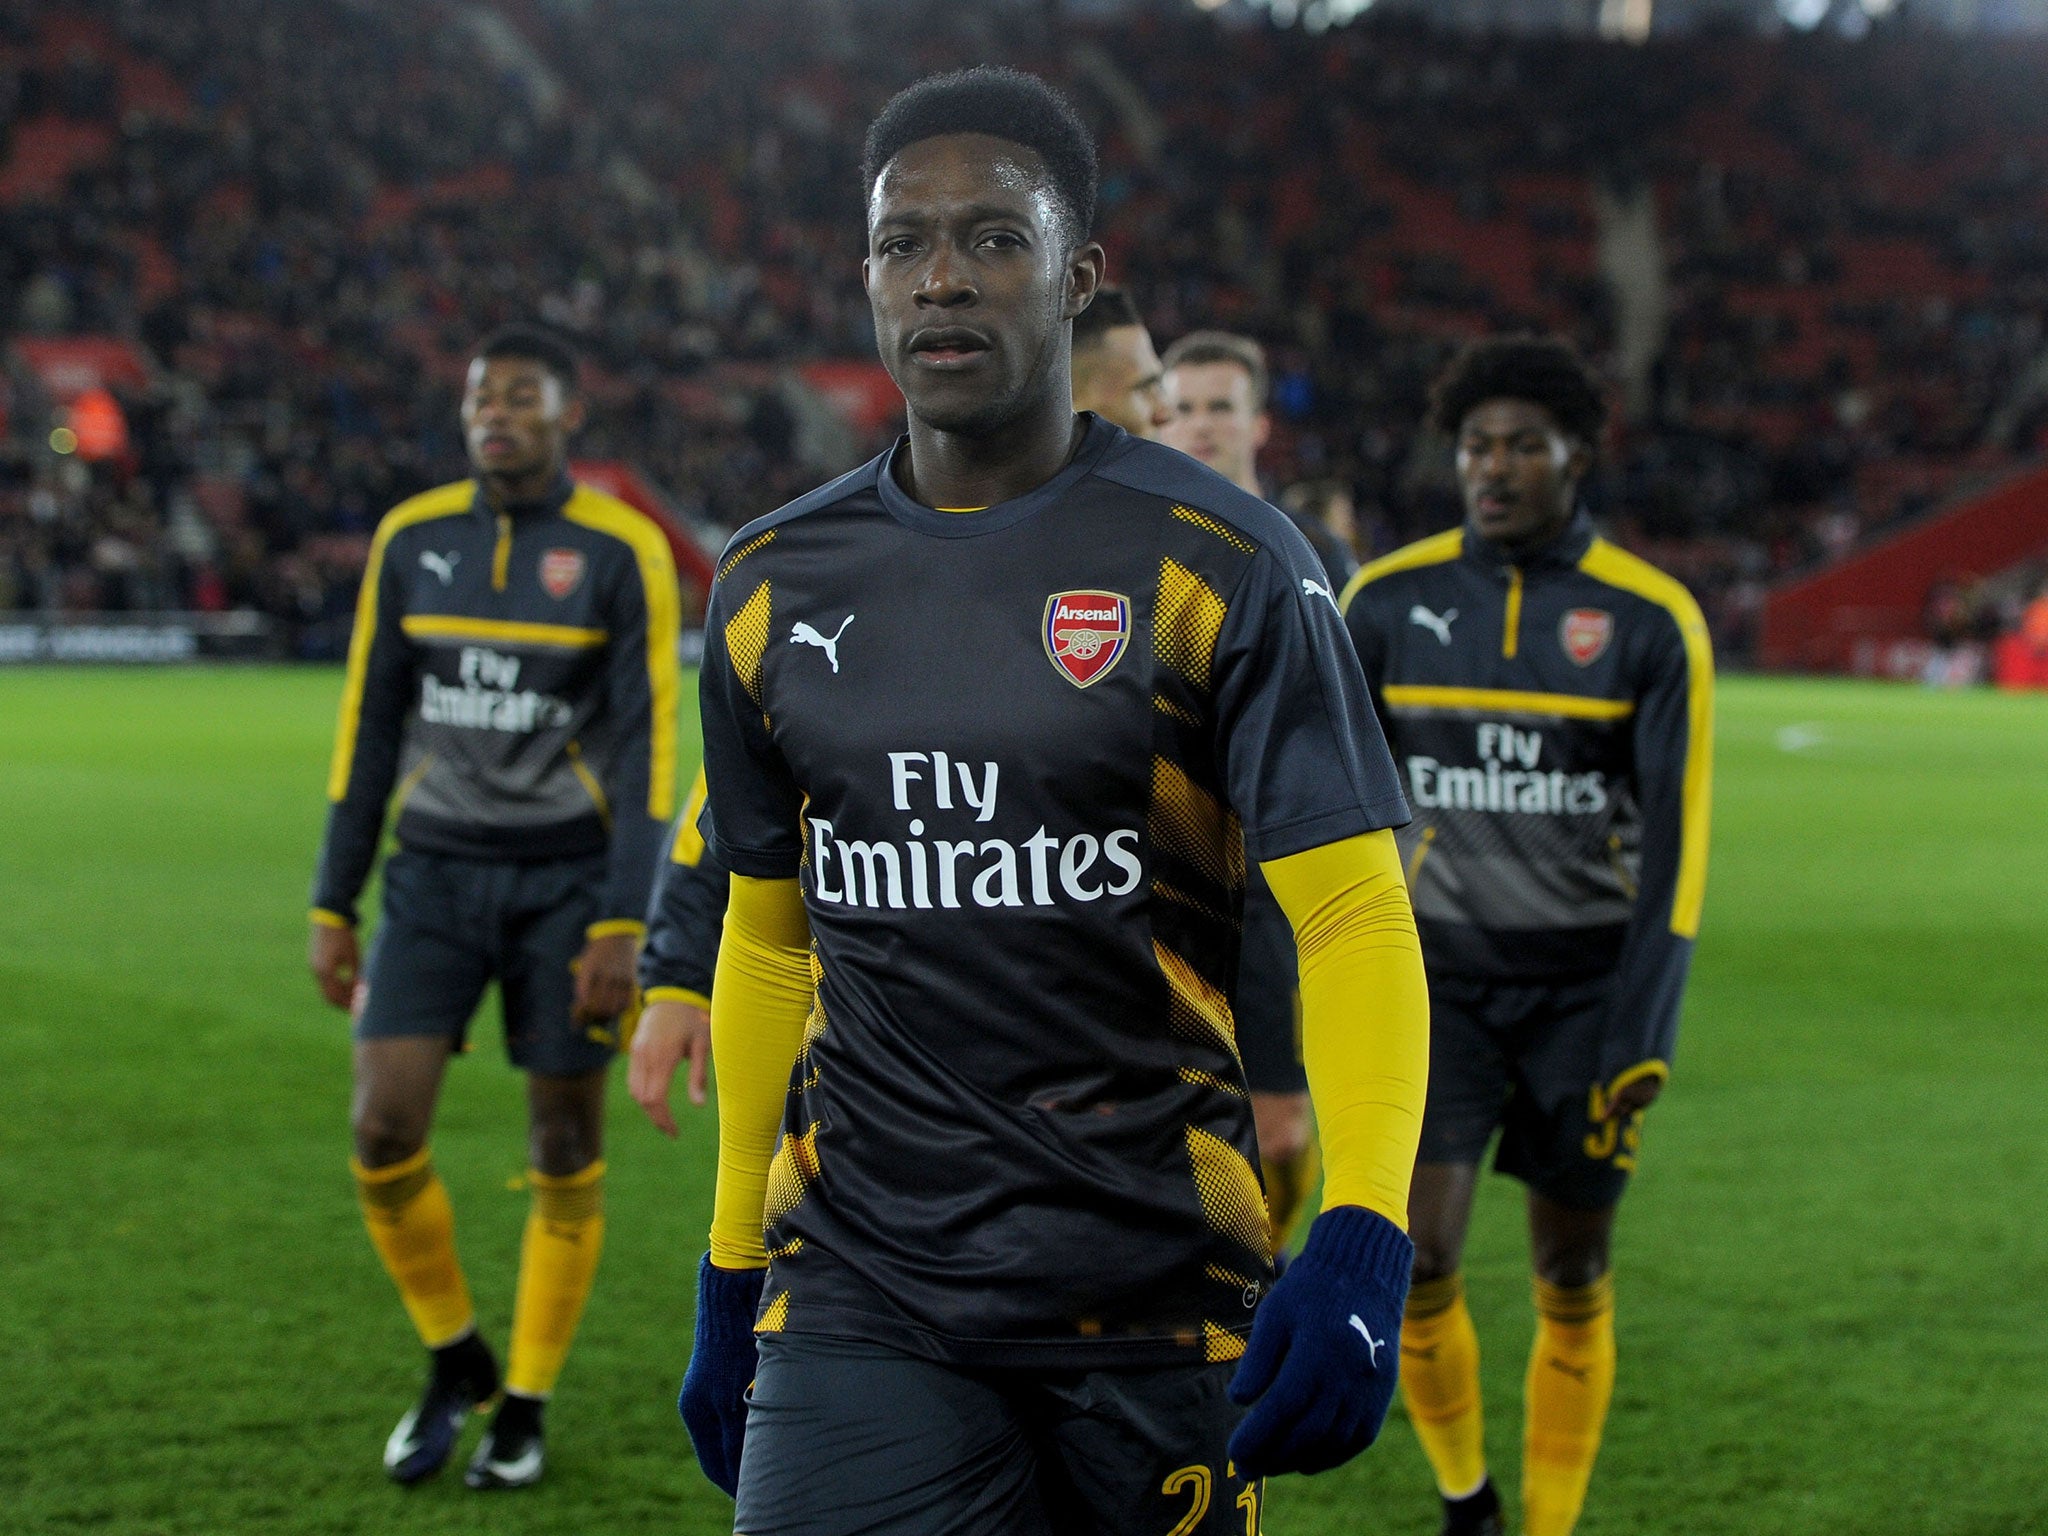 Danny Welbeck is back in action for Arsenal